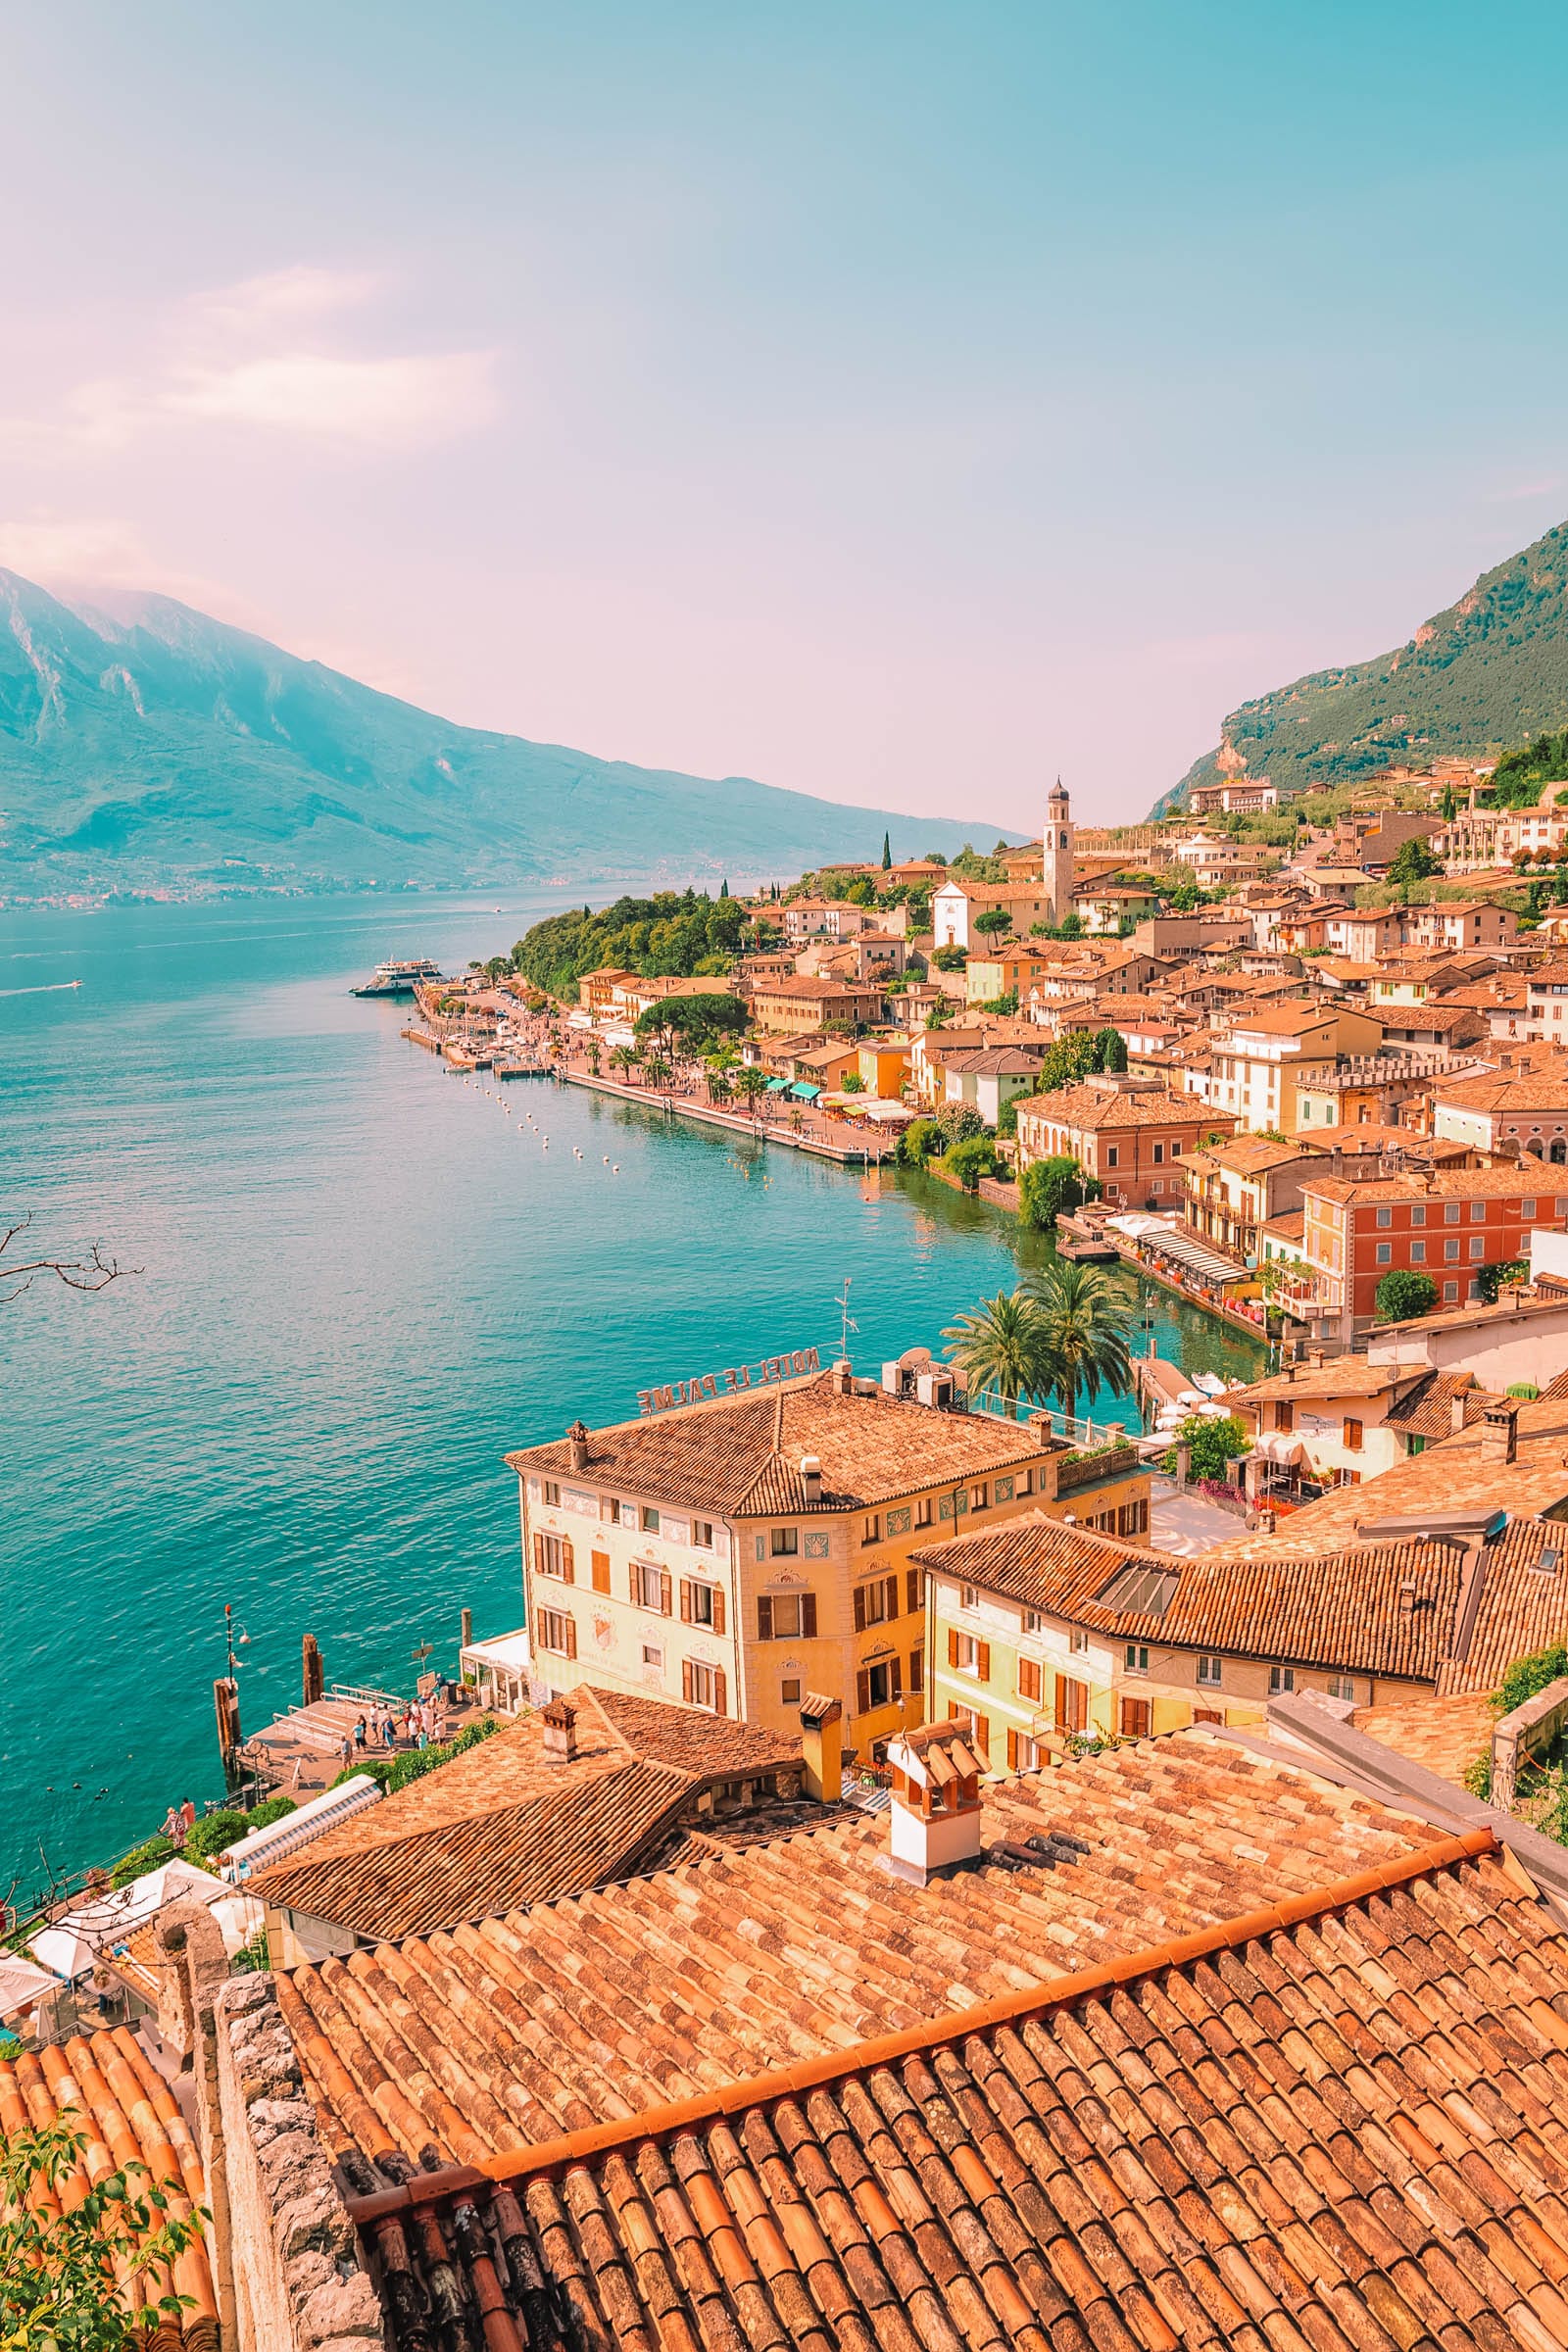 11 Very Best Things To Do In Lake Garda, Italy – Hand Luggage Only